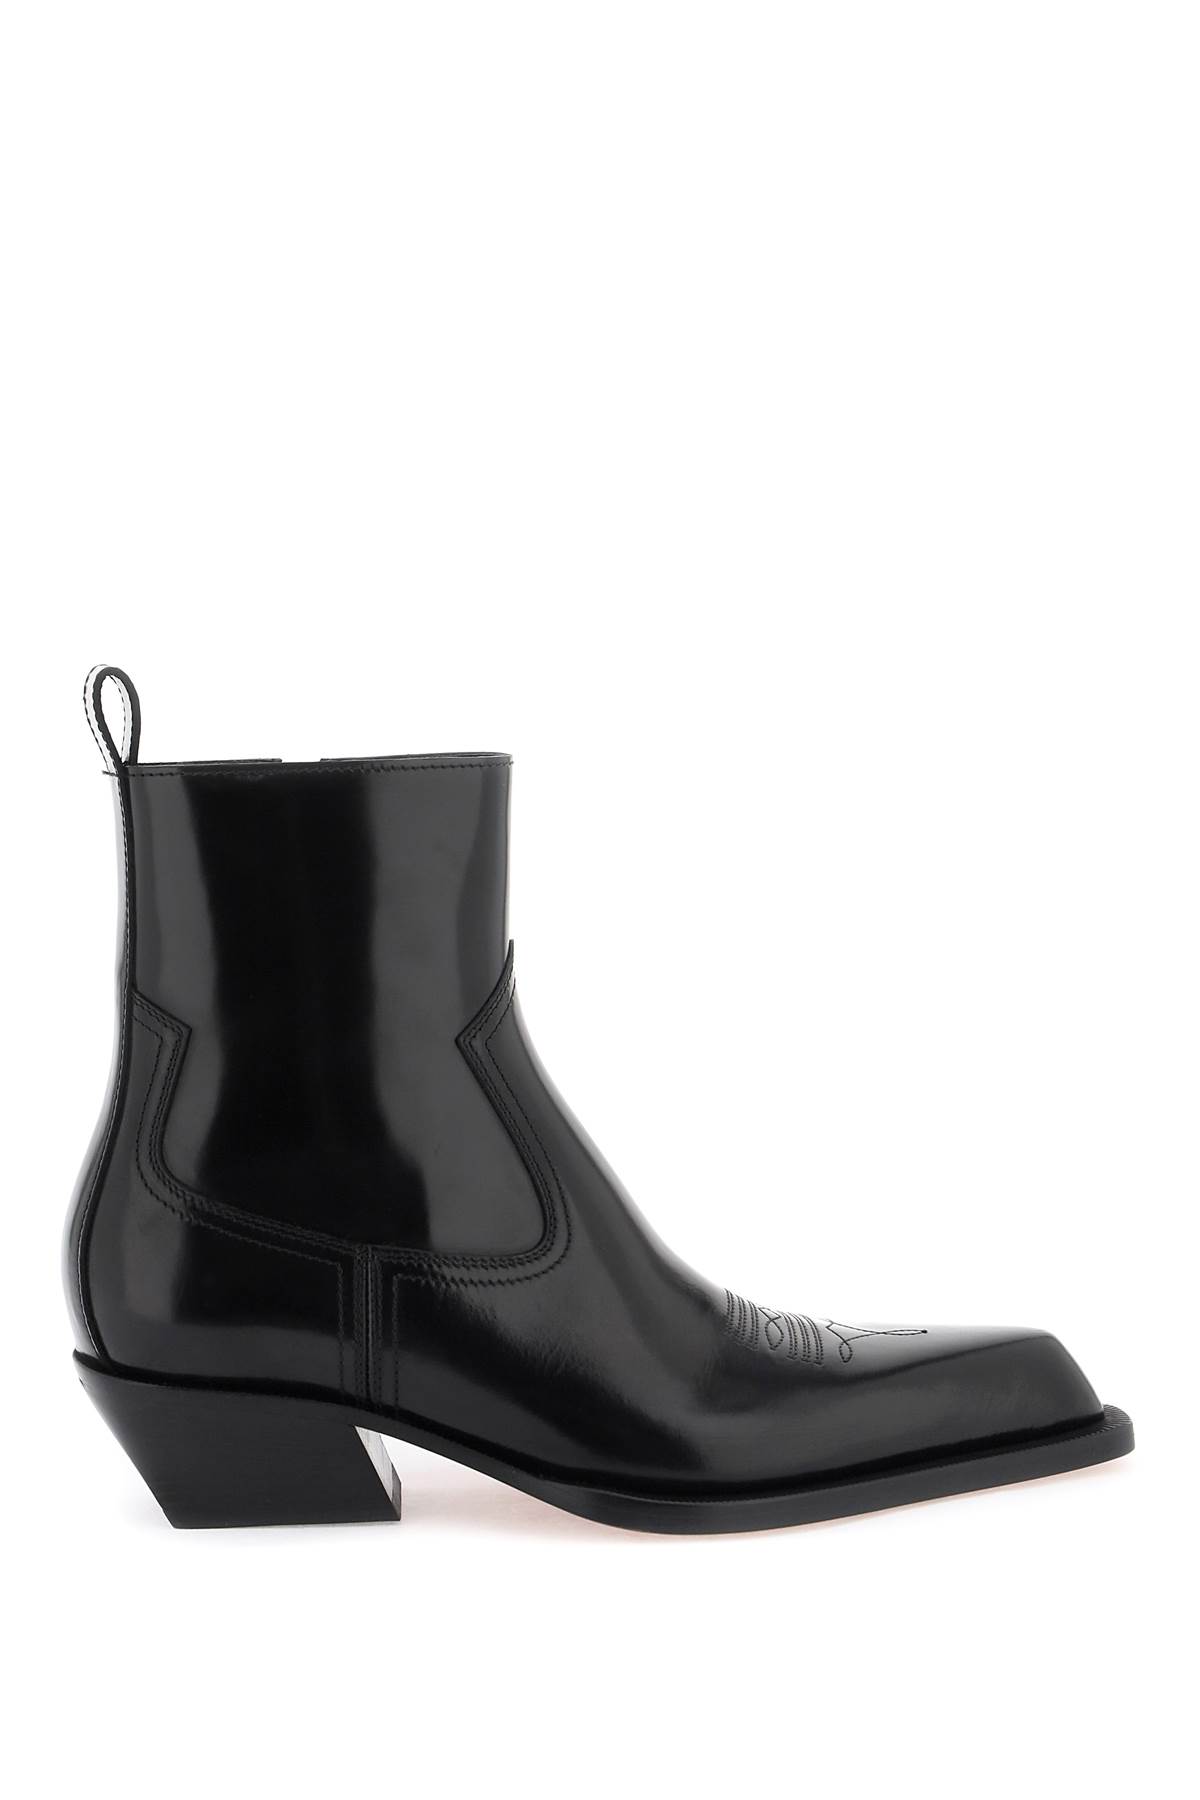 OFF-WHITE WESTERN BLADE ANKLE BOOTS